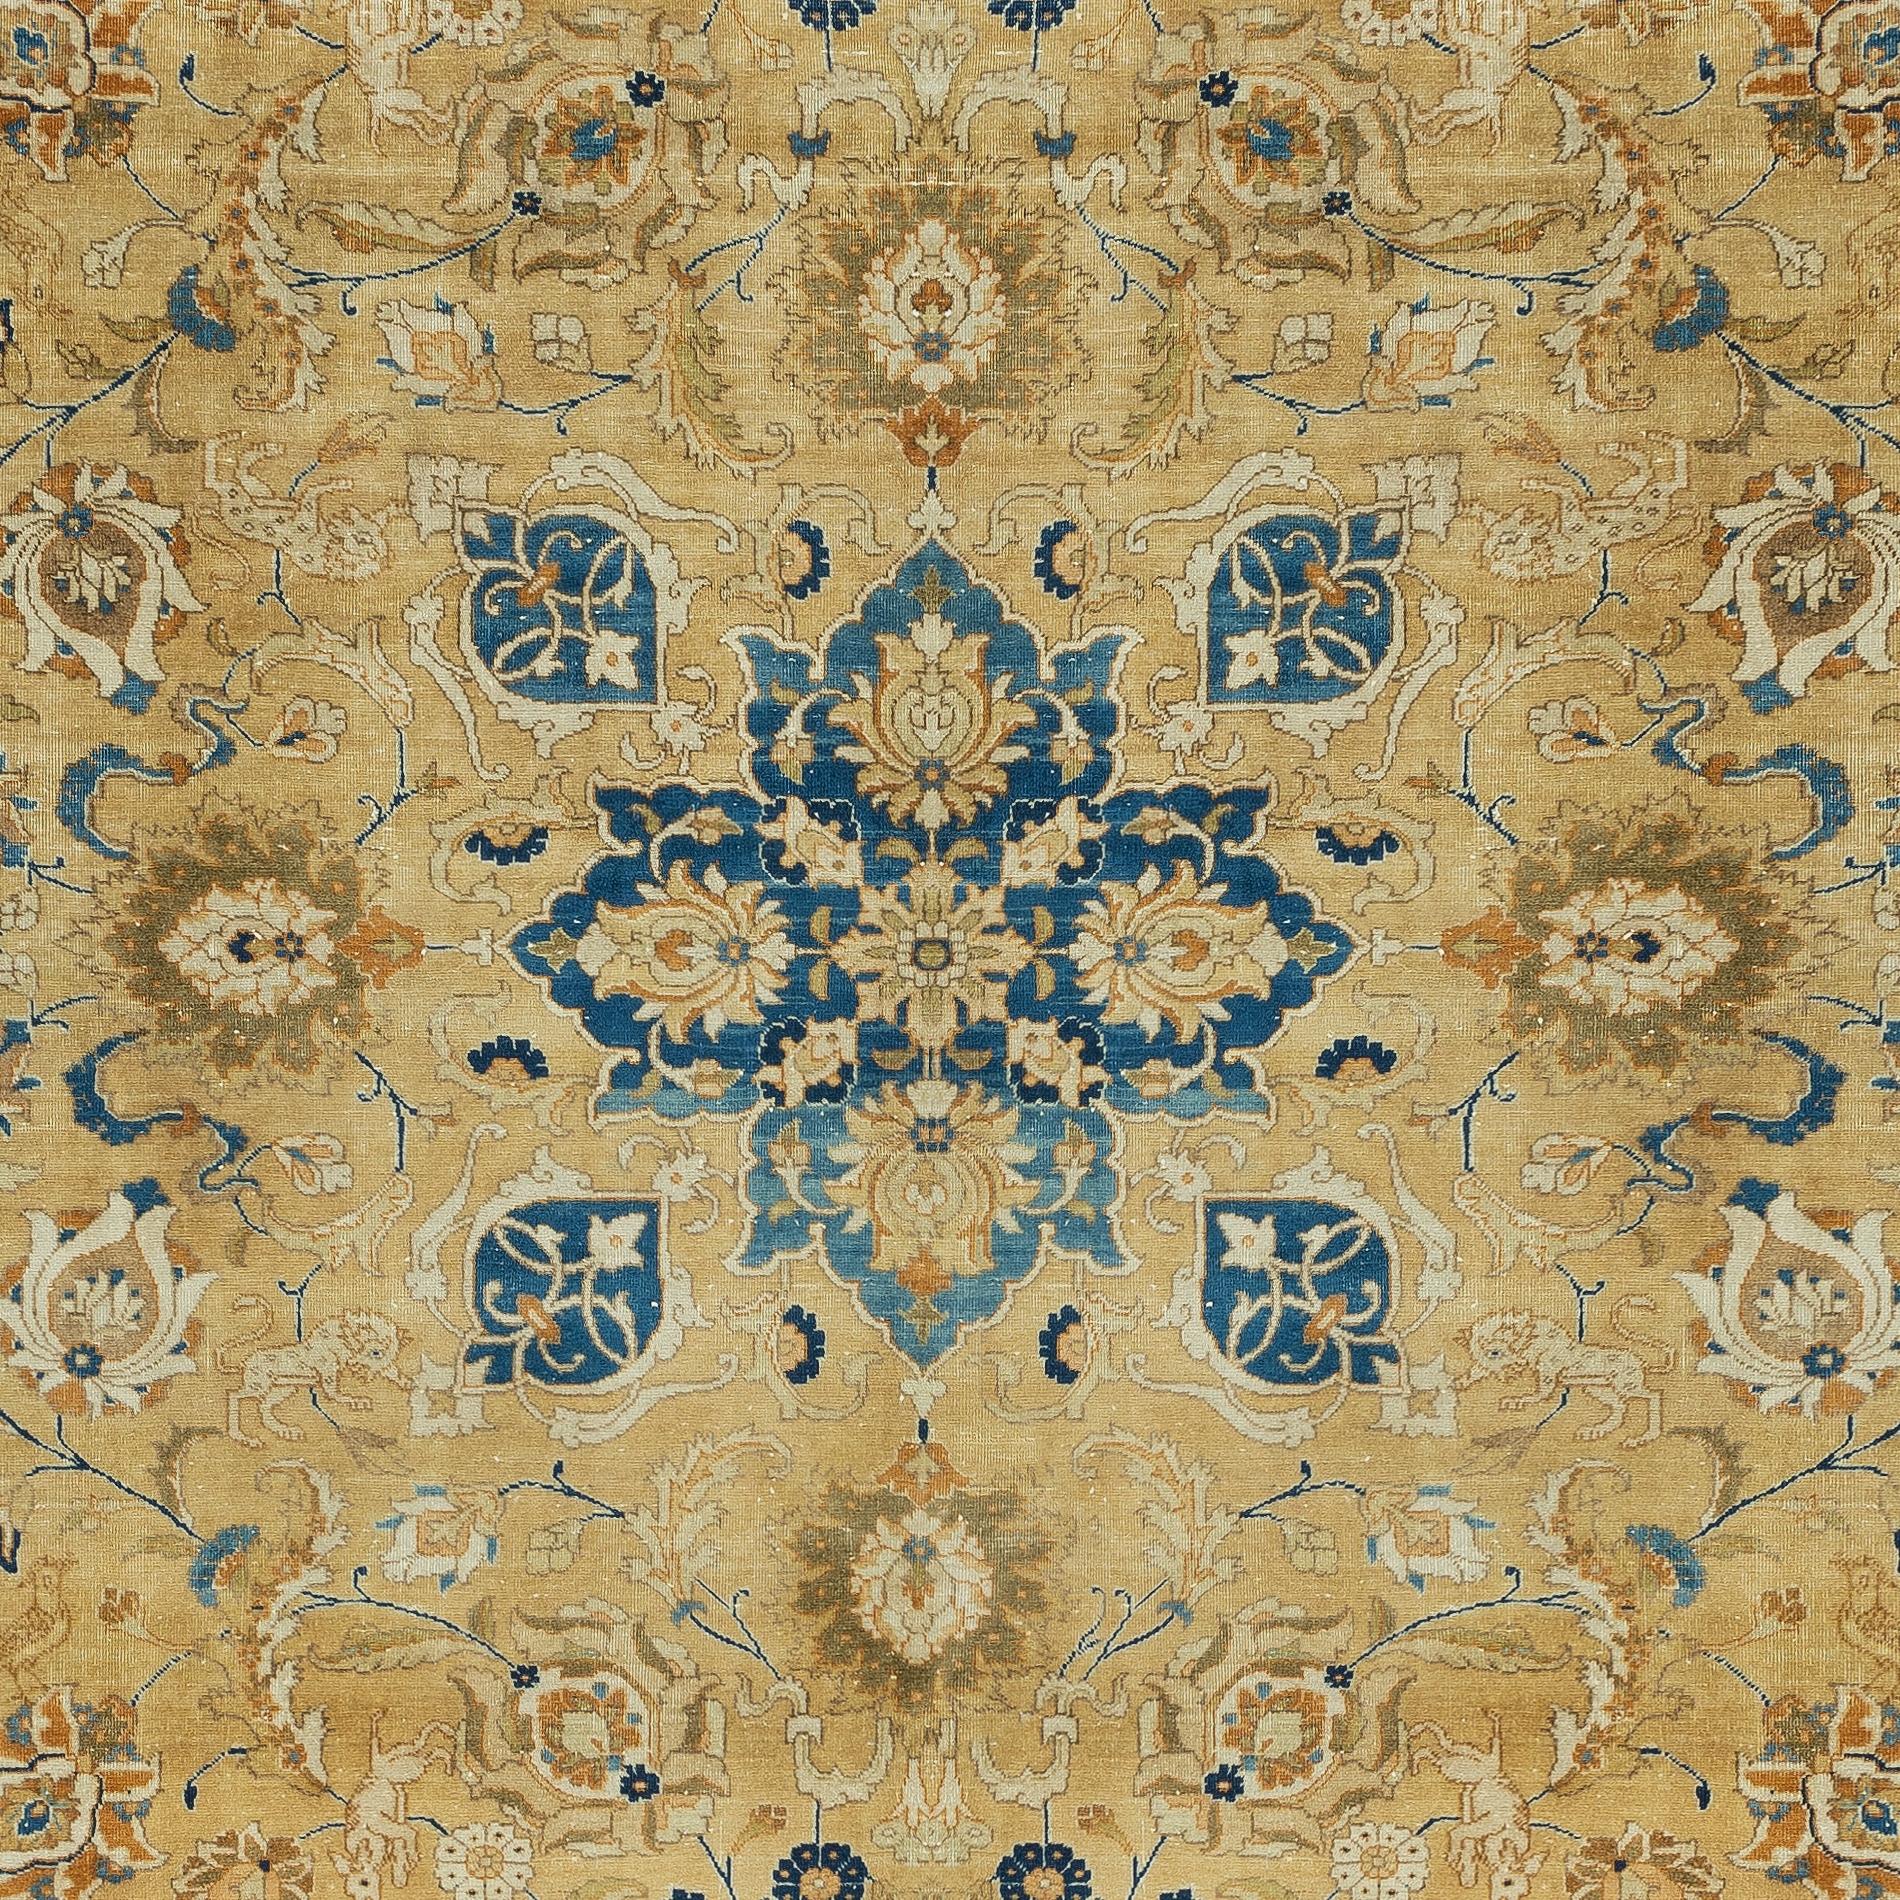 8x11 Ft Hand Knotted Area Rug in Beige & Blue, Vintage Floral Turkish Carpet In Good Condition For Sale In Philadelphia, PA